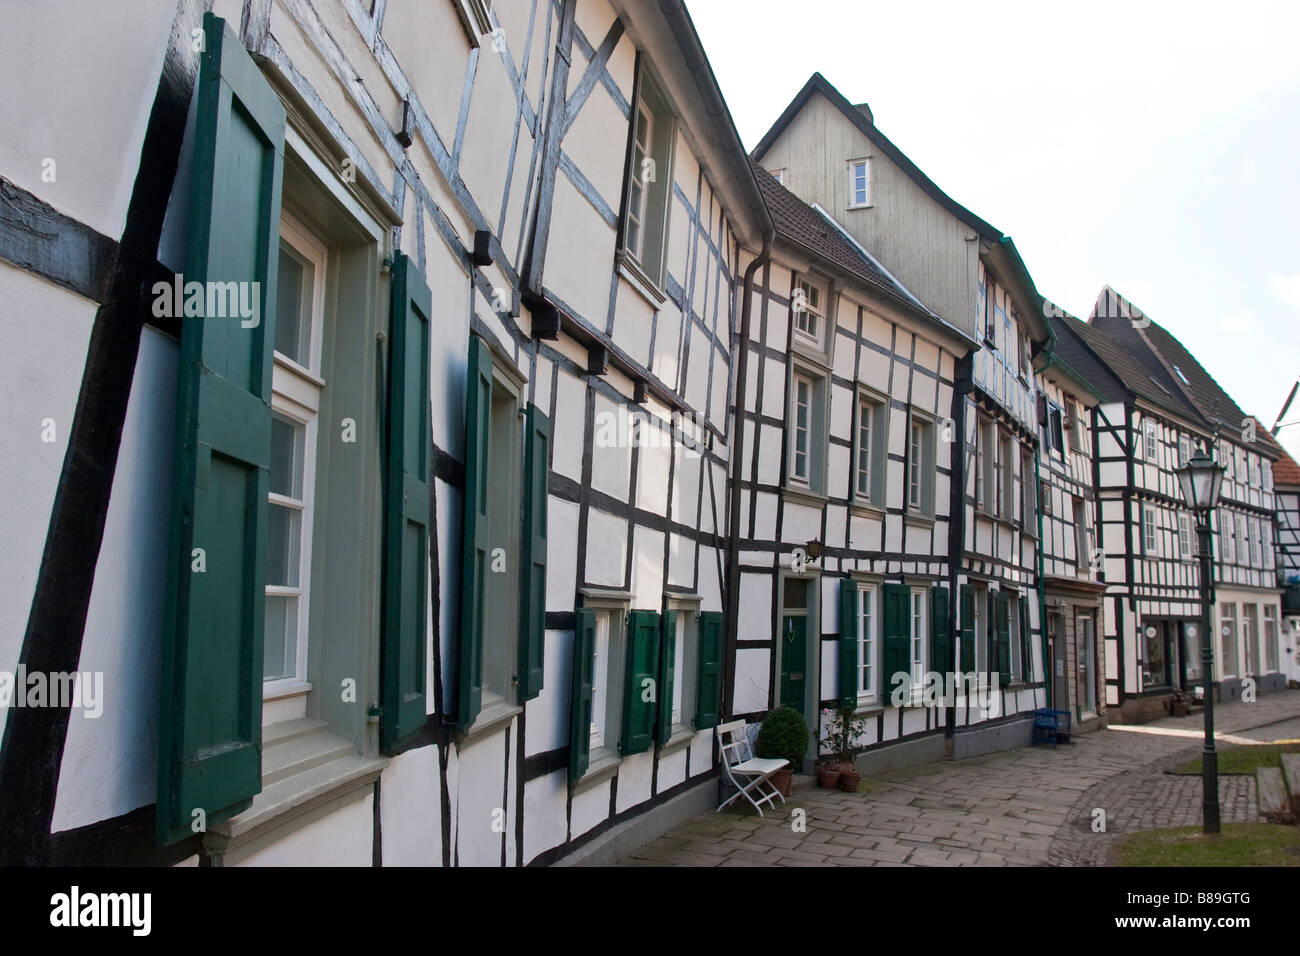 Traditional German architecture in the old town of Hattingen, Germany Stock Photo